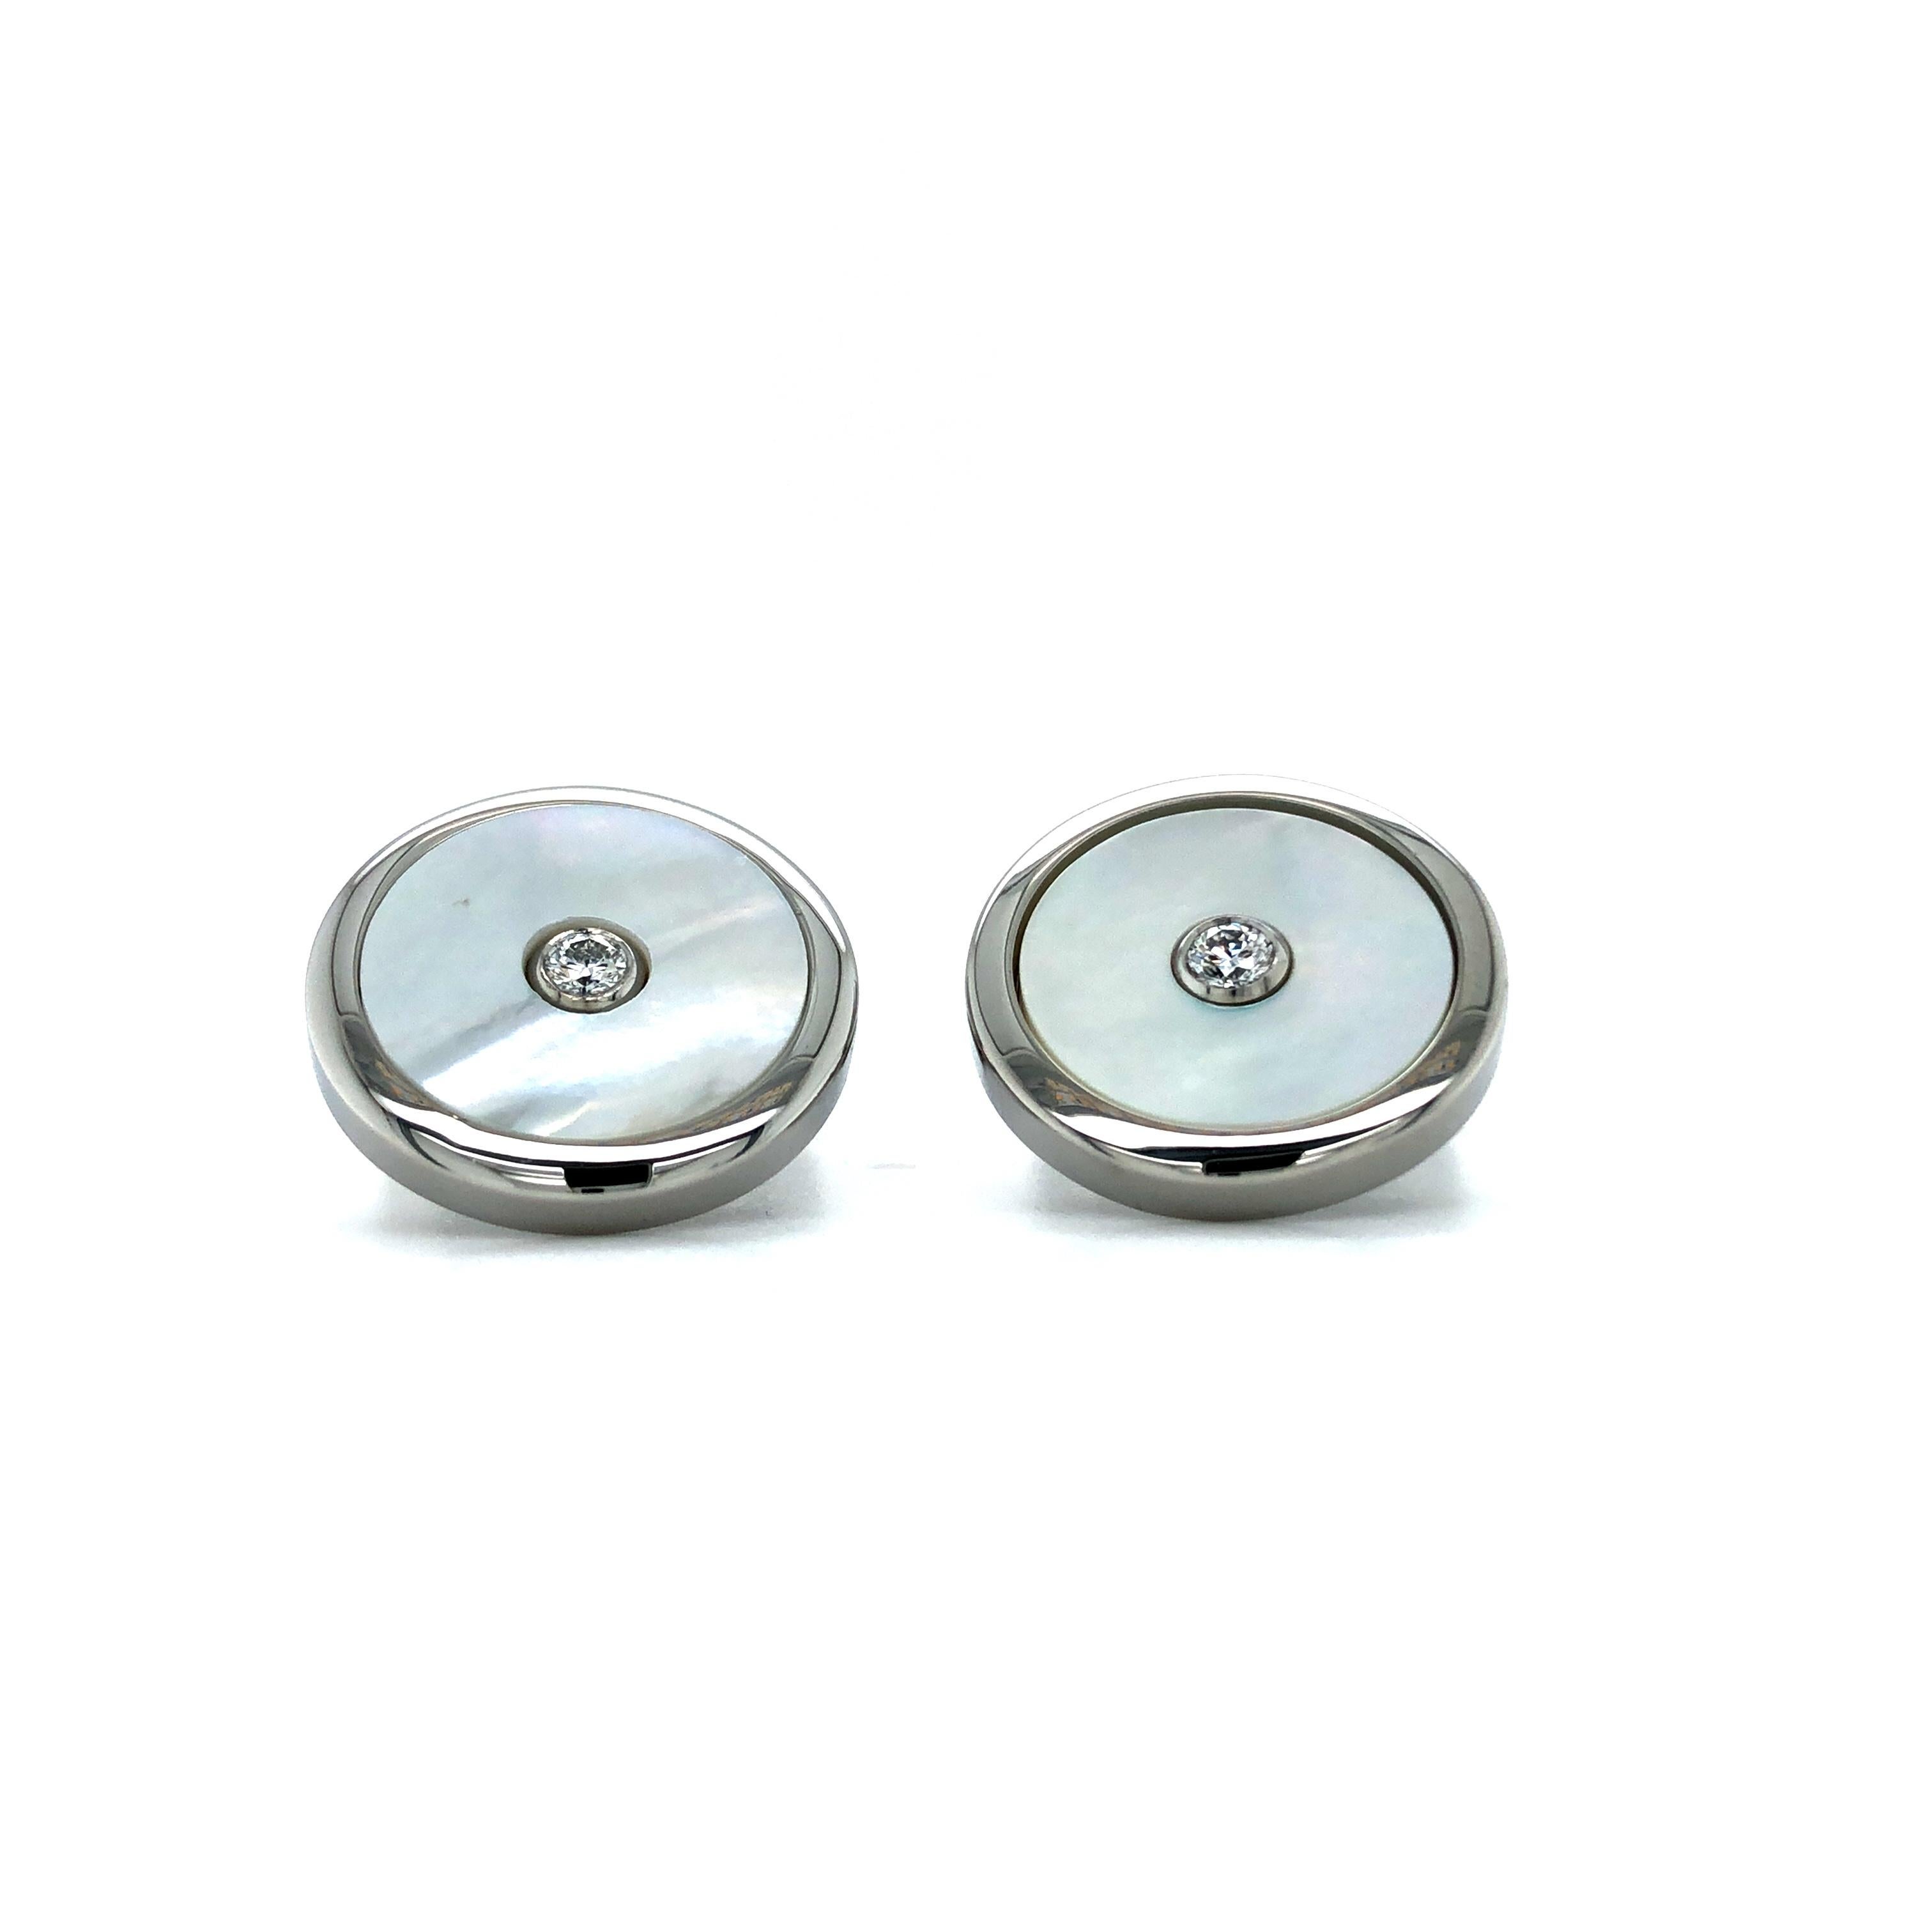 Round Cut Round Cufflinks Stainless Steel White Mother of Pearl Inlay - 2 Diamonds 0.2ct For Sale